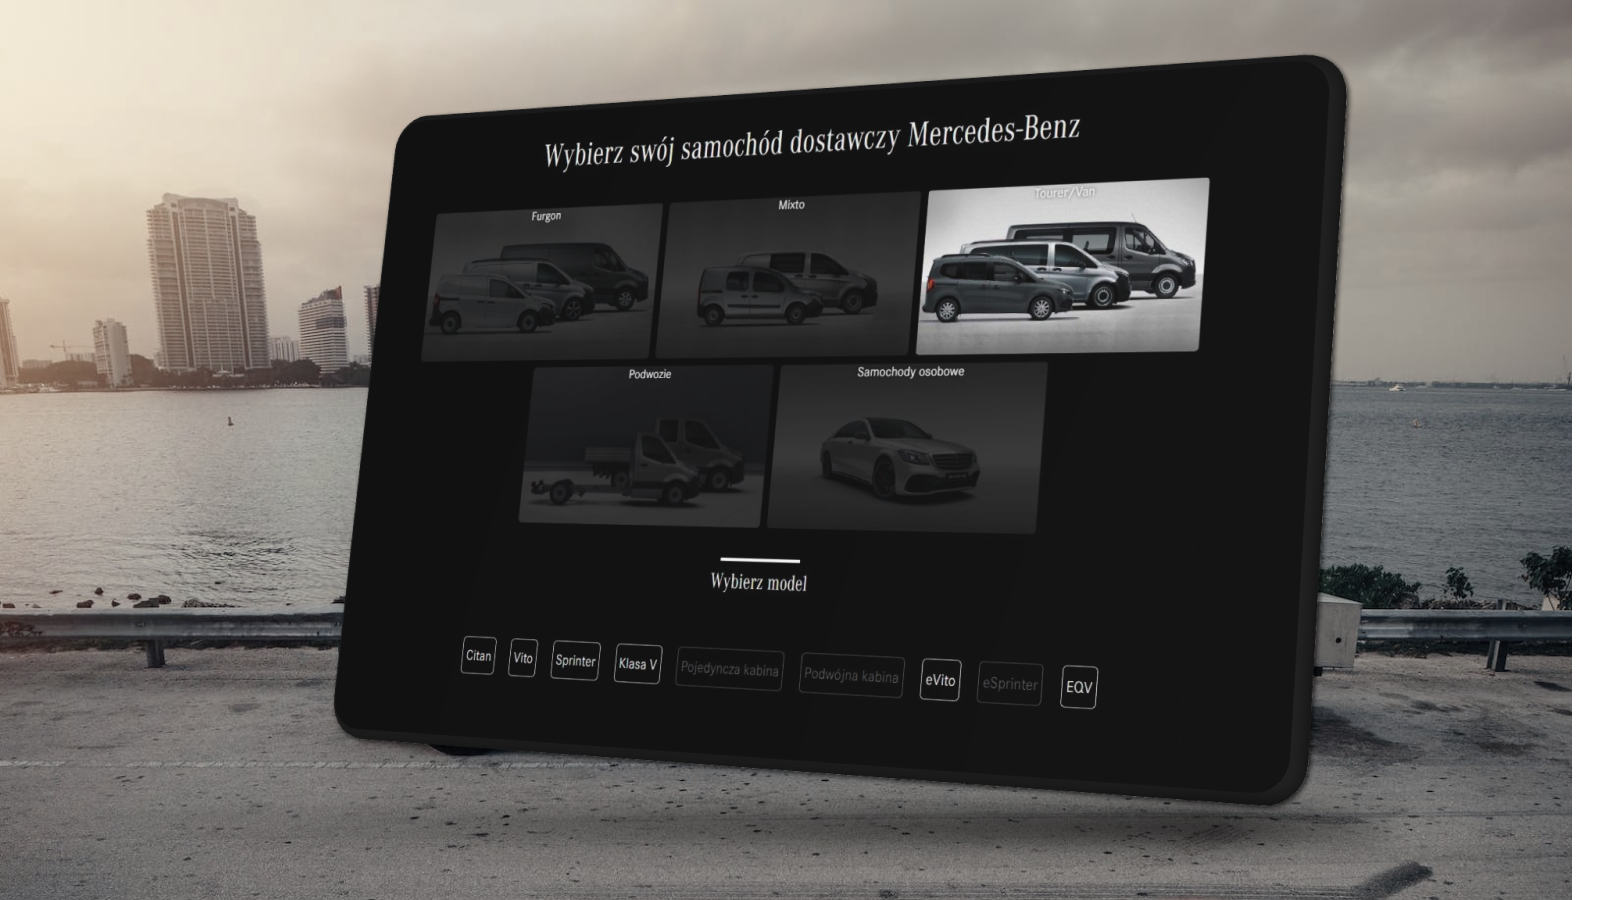 levitating launch screen of mercedes leasing platform with commercial vehicle categories. The platform's elegance and dark colors enhance the images of the cars, fitting in with the brand's style.